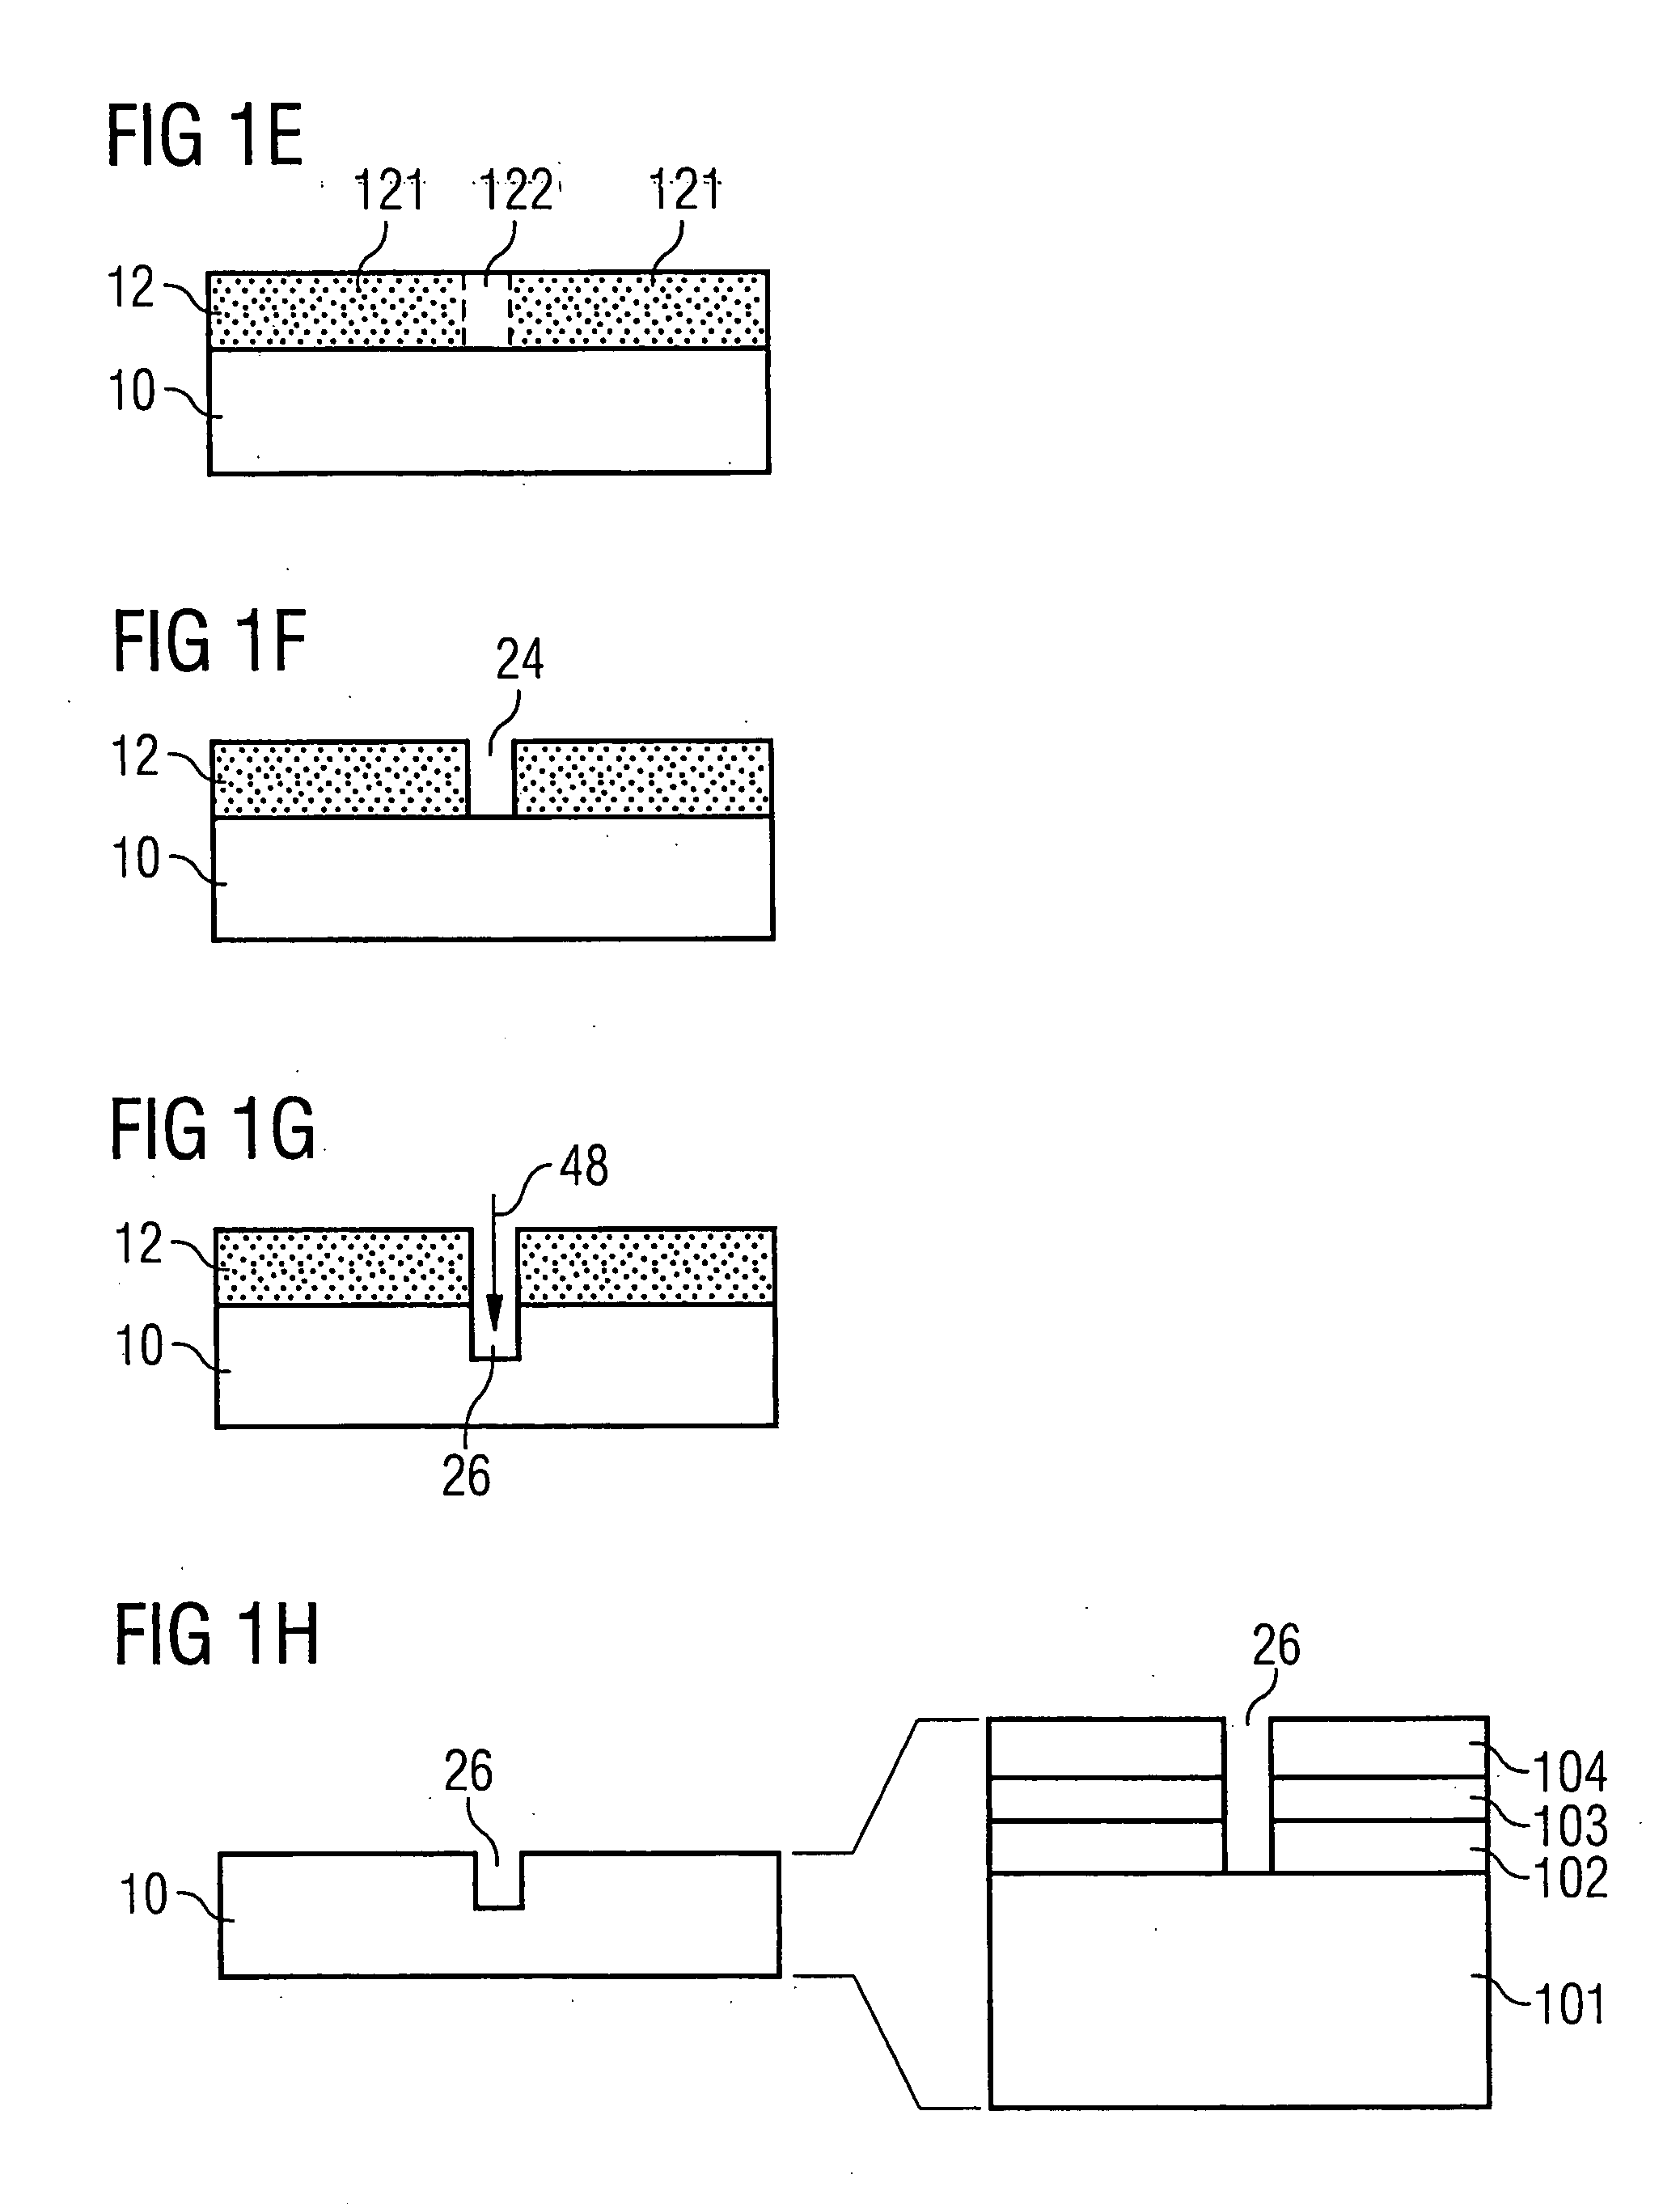 Method for forming a trench in a layer or a layer stack on a semiconductor wafer